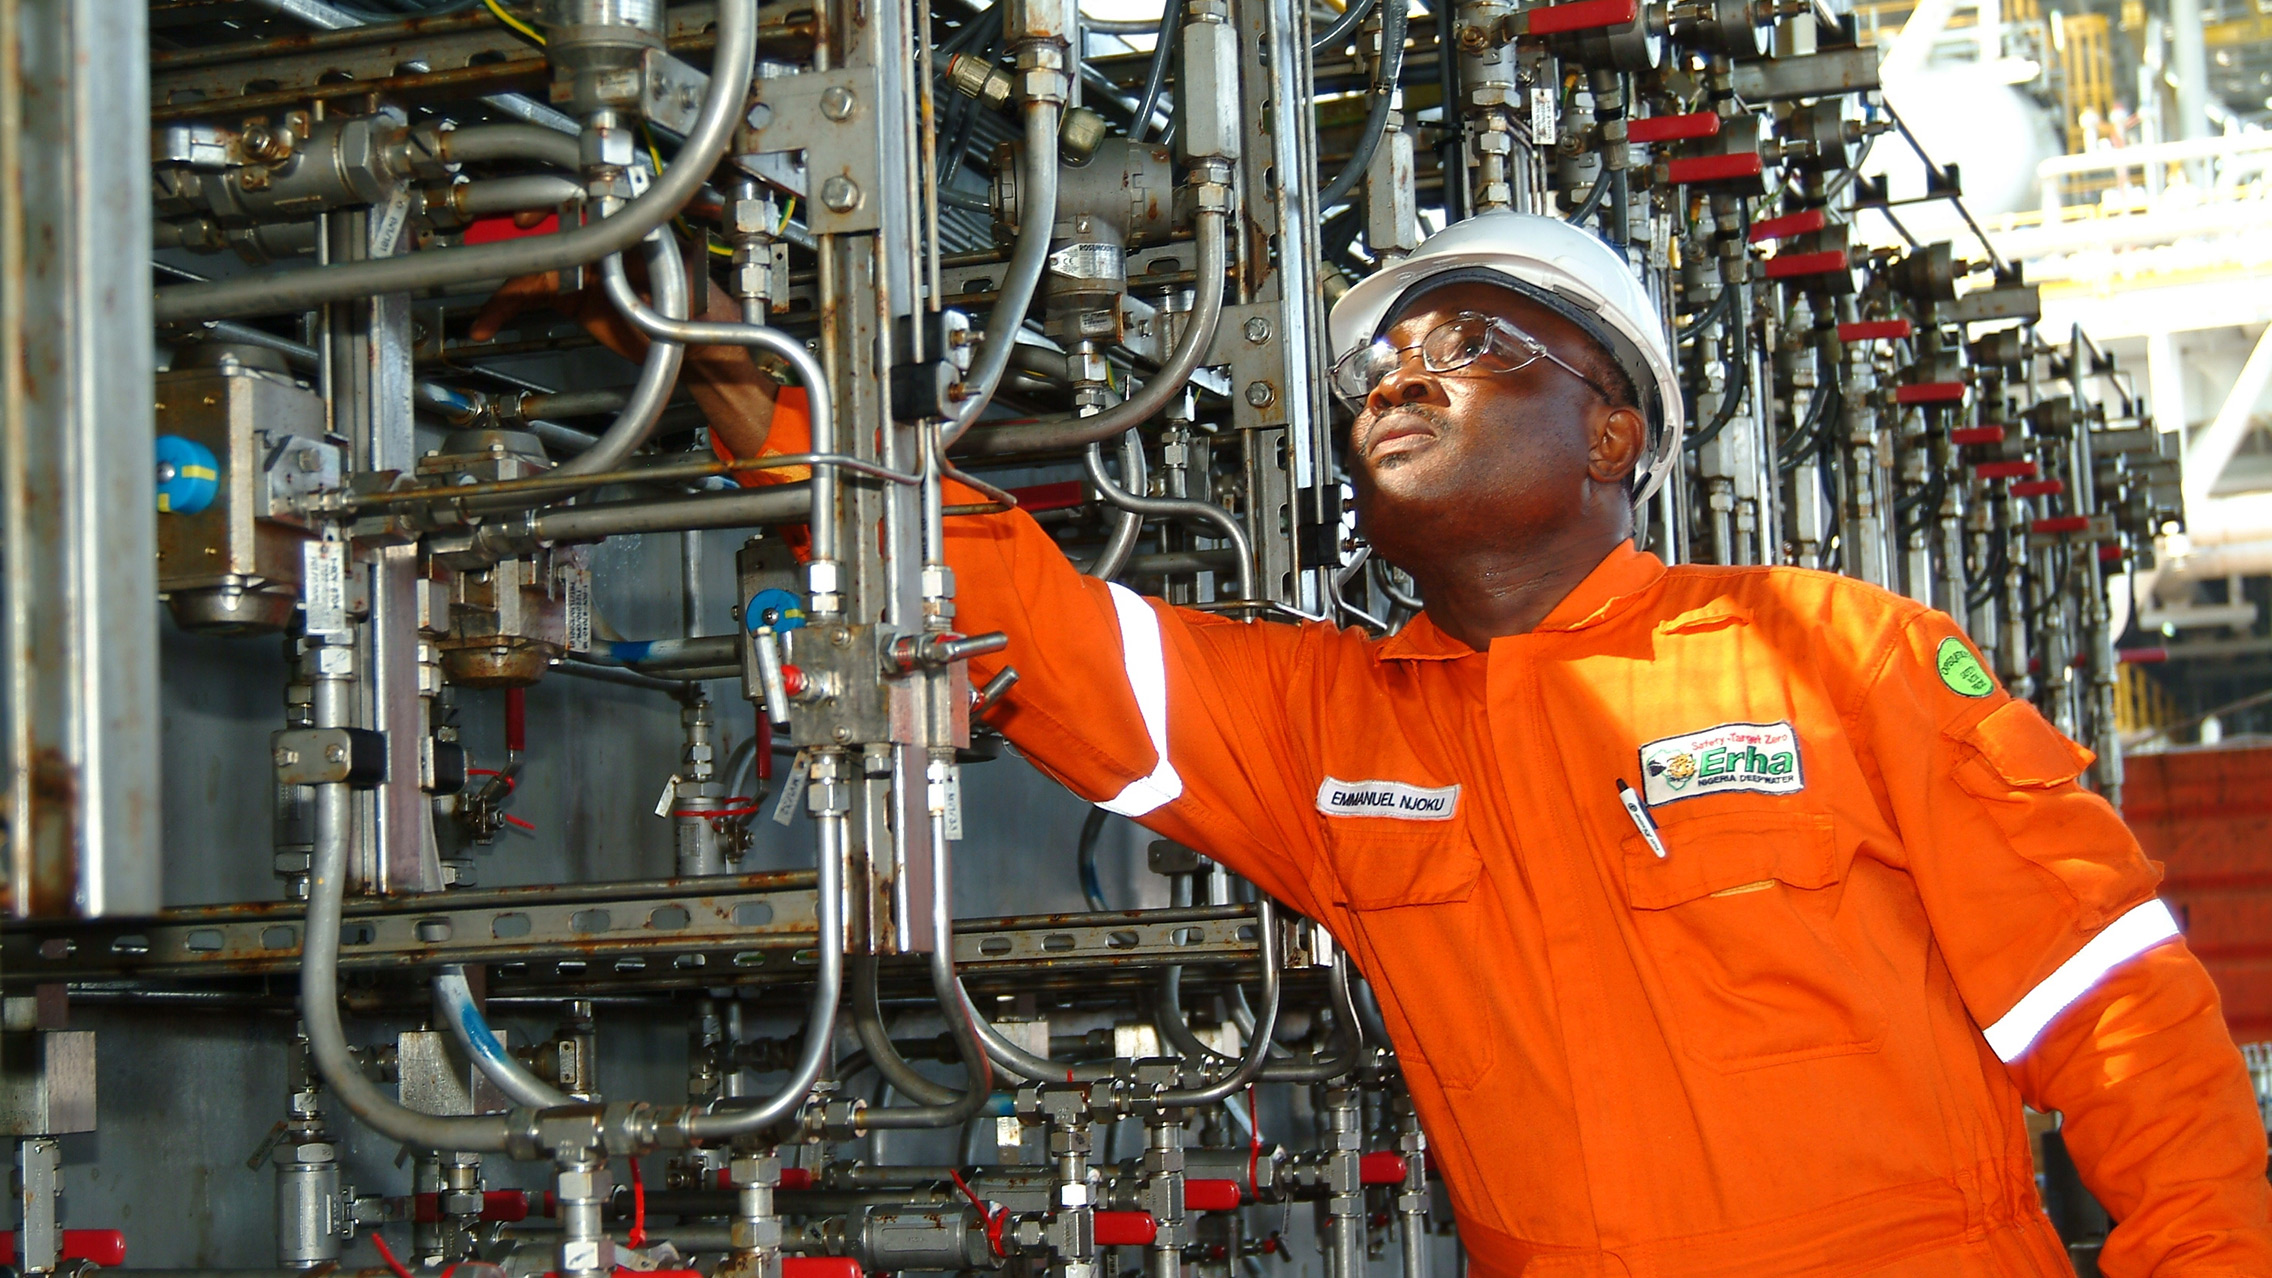 Nigeria's Independent Oil Giant to Invest $5 Billion to Increase Output